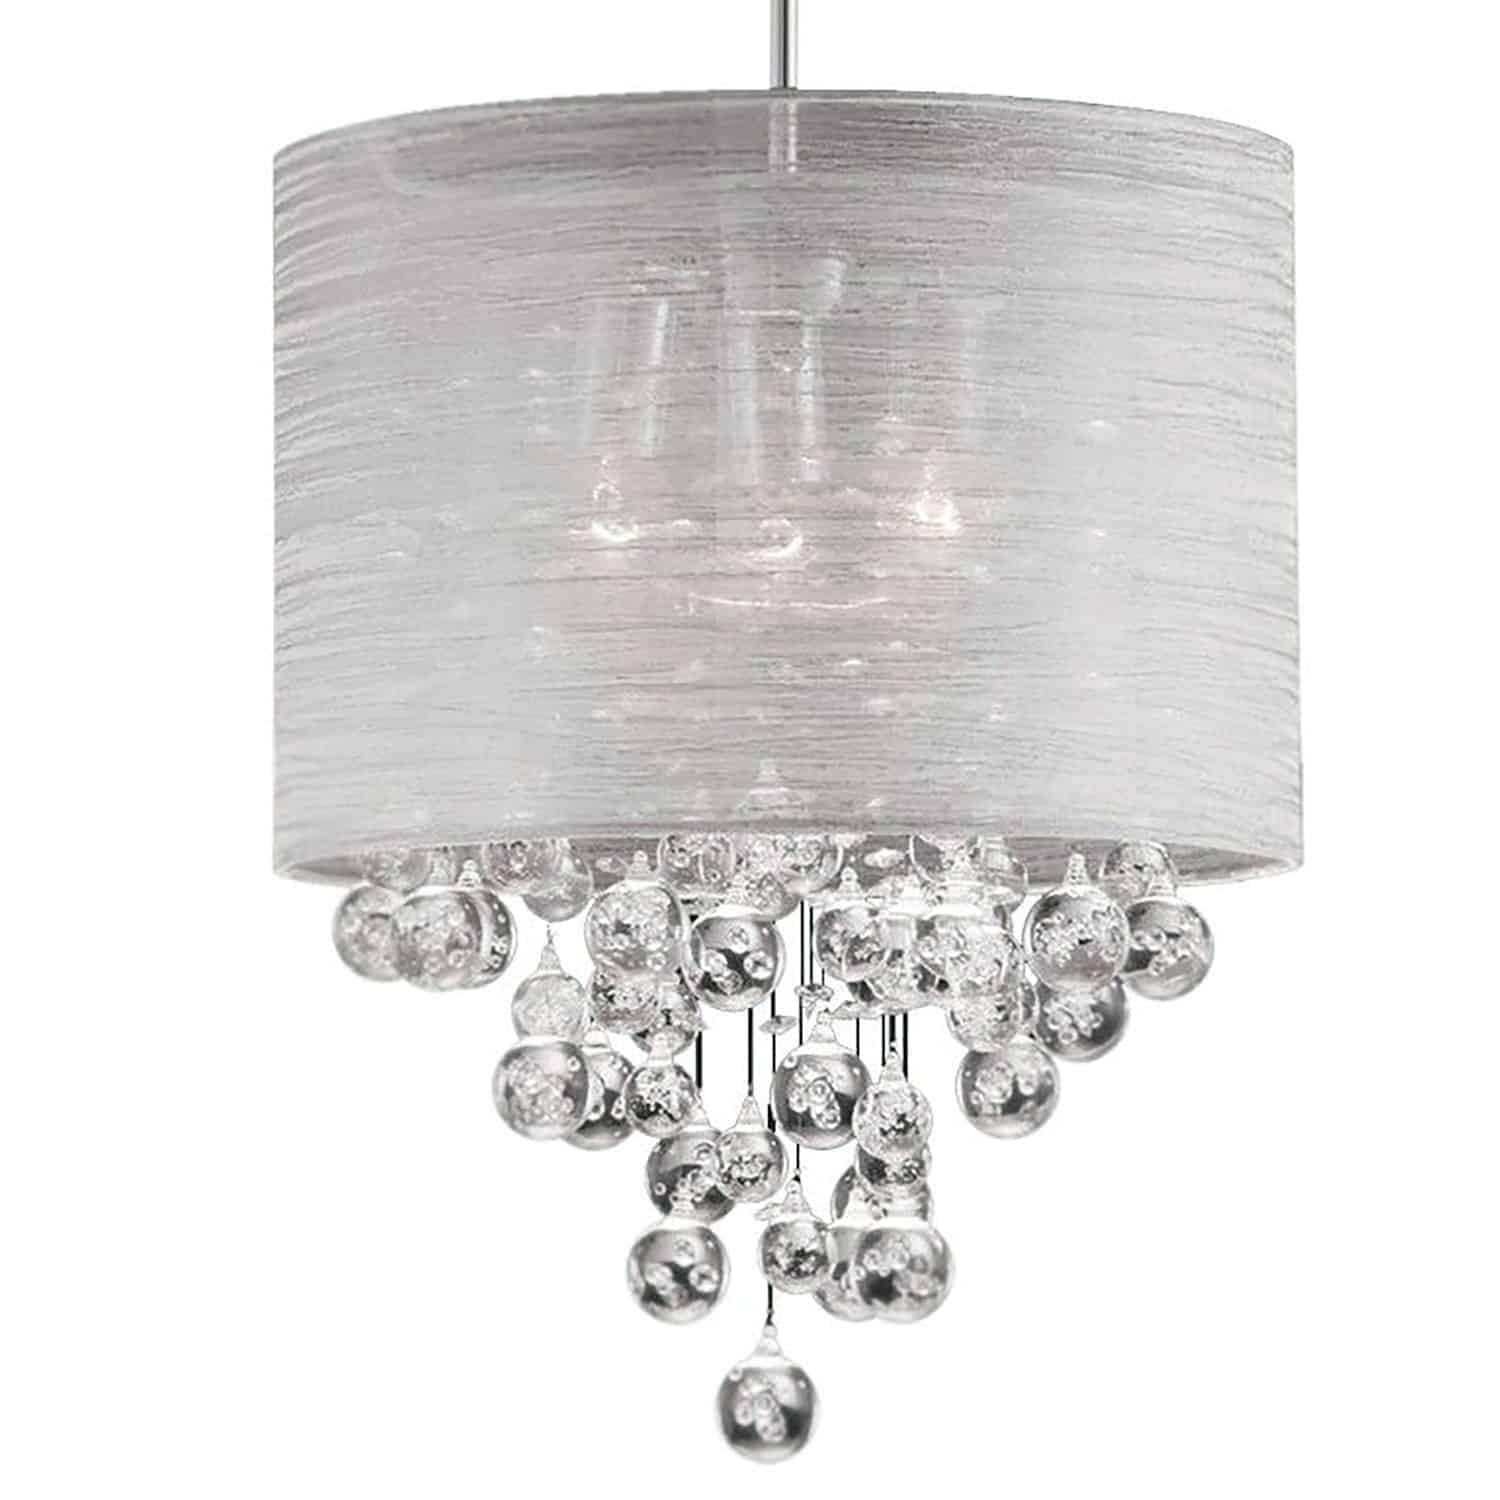 When a spectacular shimmer is what the area calls for, look for the Tahini family of lighting. With its striking design and lovely shimmer of light, it's a standout design in your modern or contemporary home. The design begins with a discrete and simple drop into a glass drum style shade with a substantial profile. From the bottom, glass crystals dangle for added eye appeal. The look is captivating, and sure to draw attention in your foyer, living room or ultra chic kitchen.